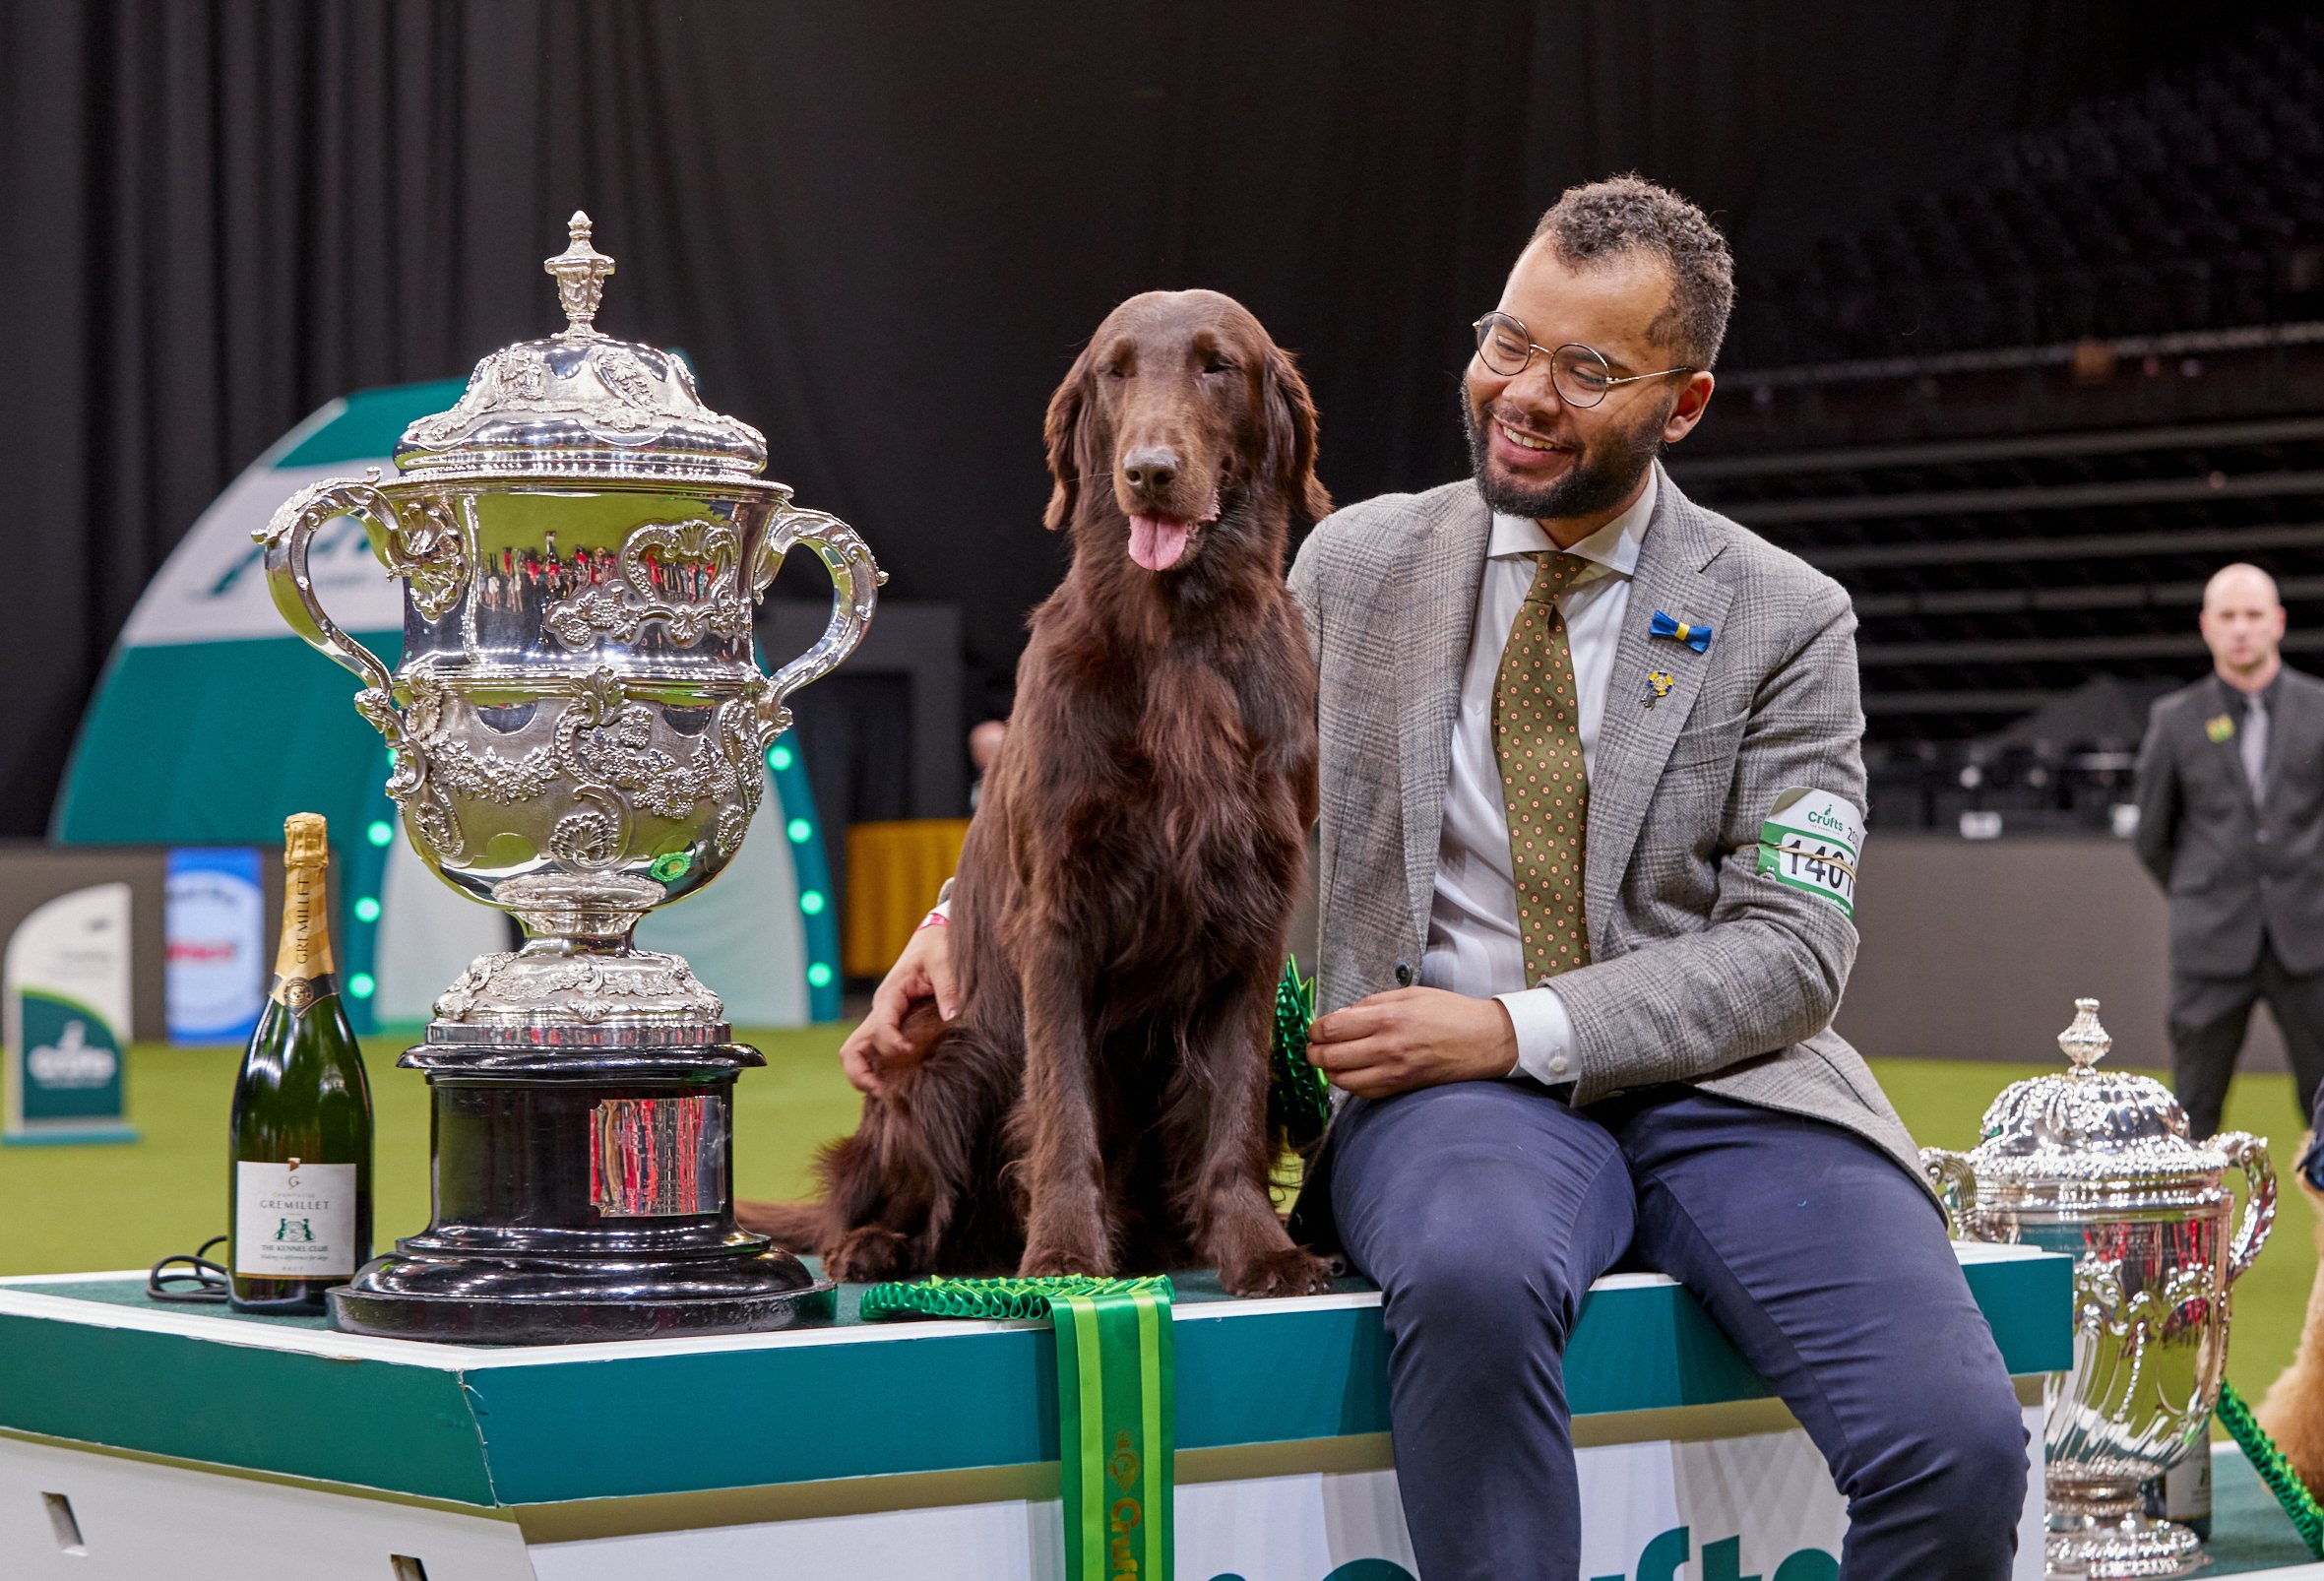  {dats} Copyright: Flick.digitalFree for editorial use image, please credit: Dave Phillips/ Flick.digitalBest in Show at Crufts 2022 at the NEC in Birmingham today.The world’s greatest dog show, Crufts, is taking place from 10th – 13th March at the N